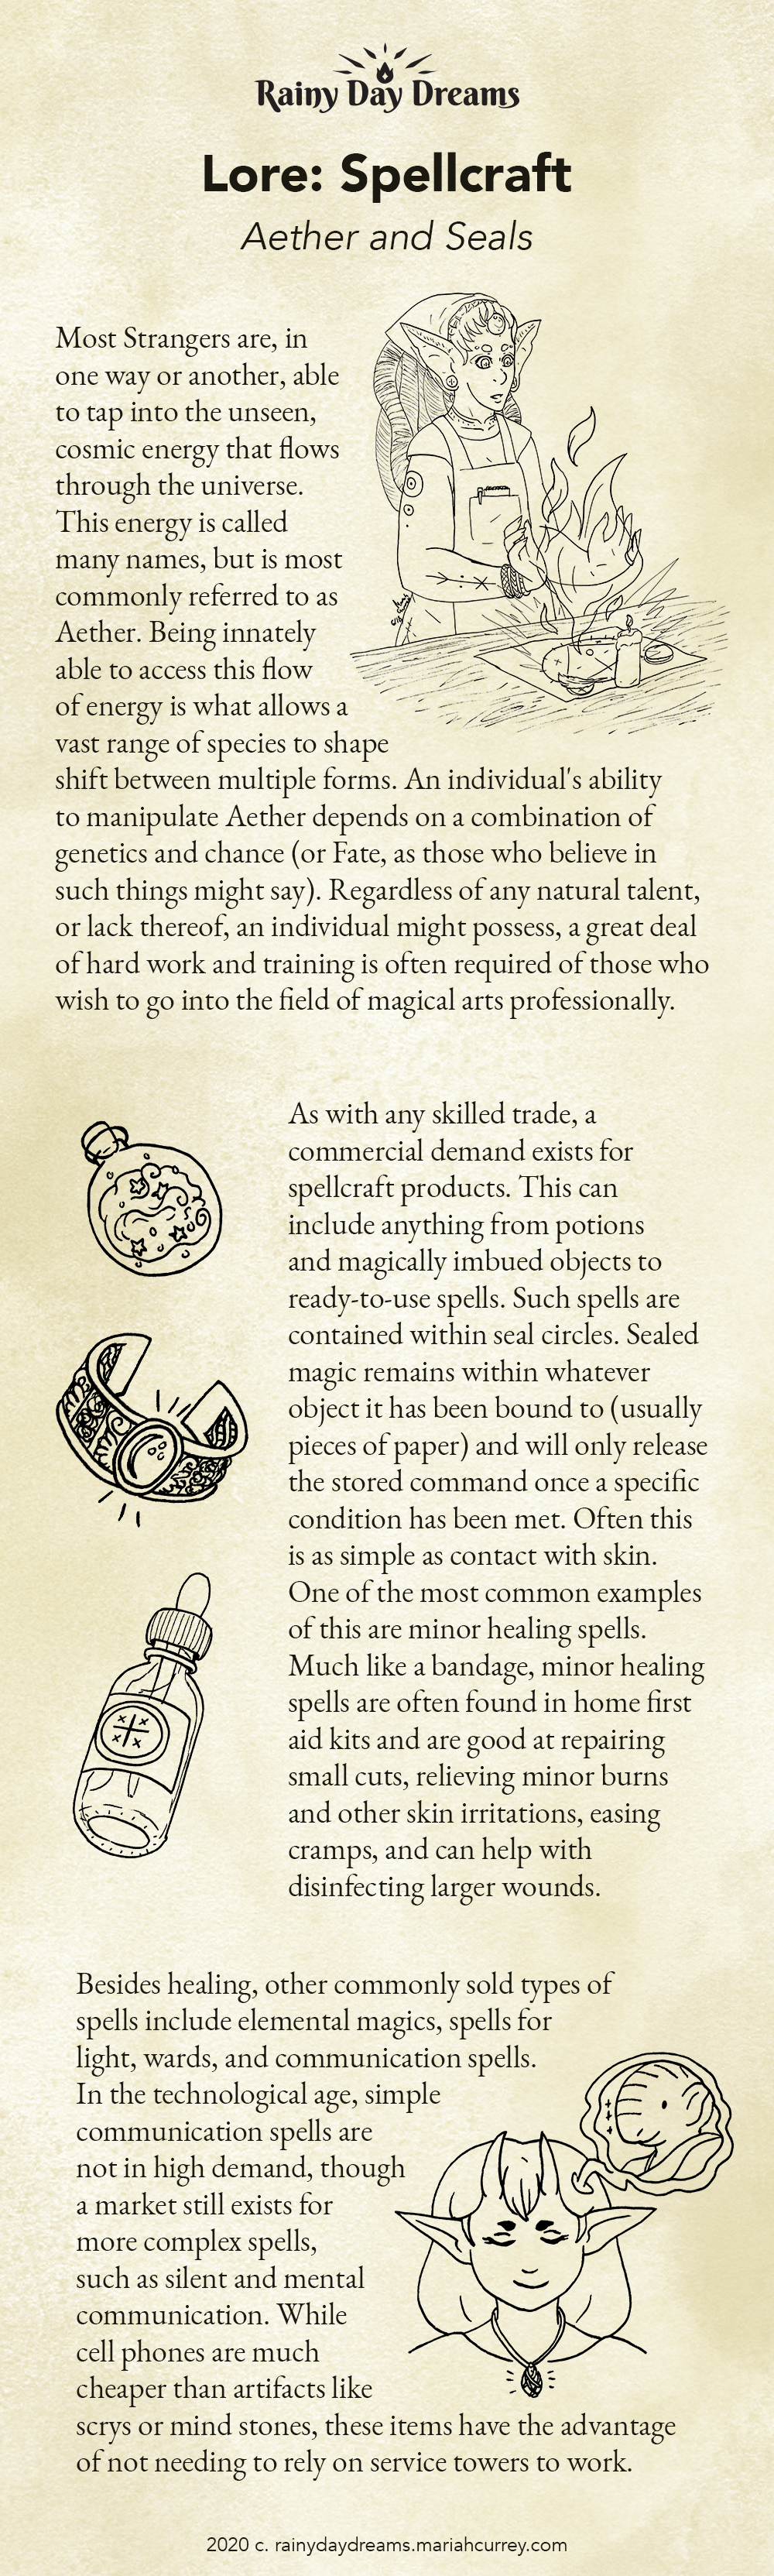 Lore: Spellcraft - Aether and Seals